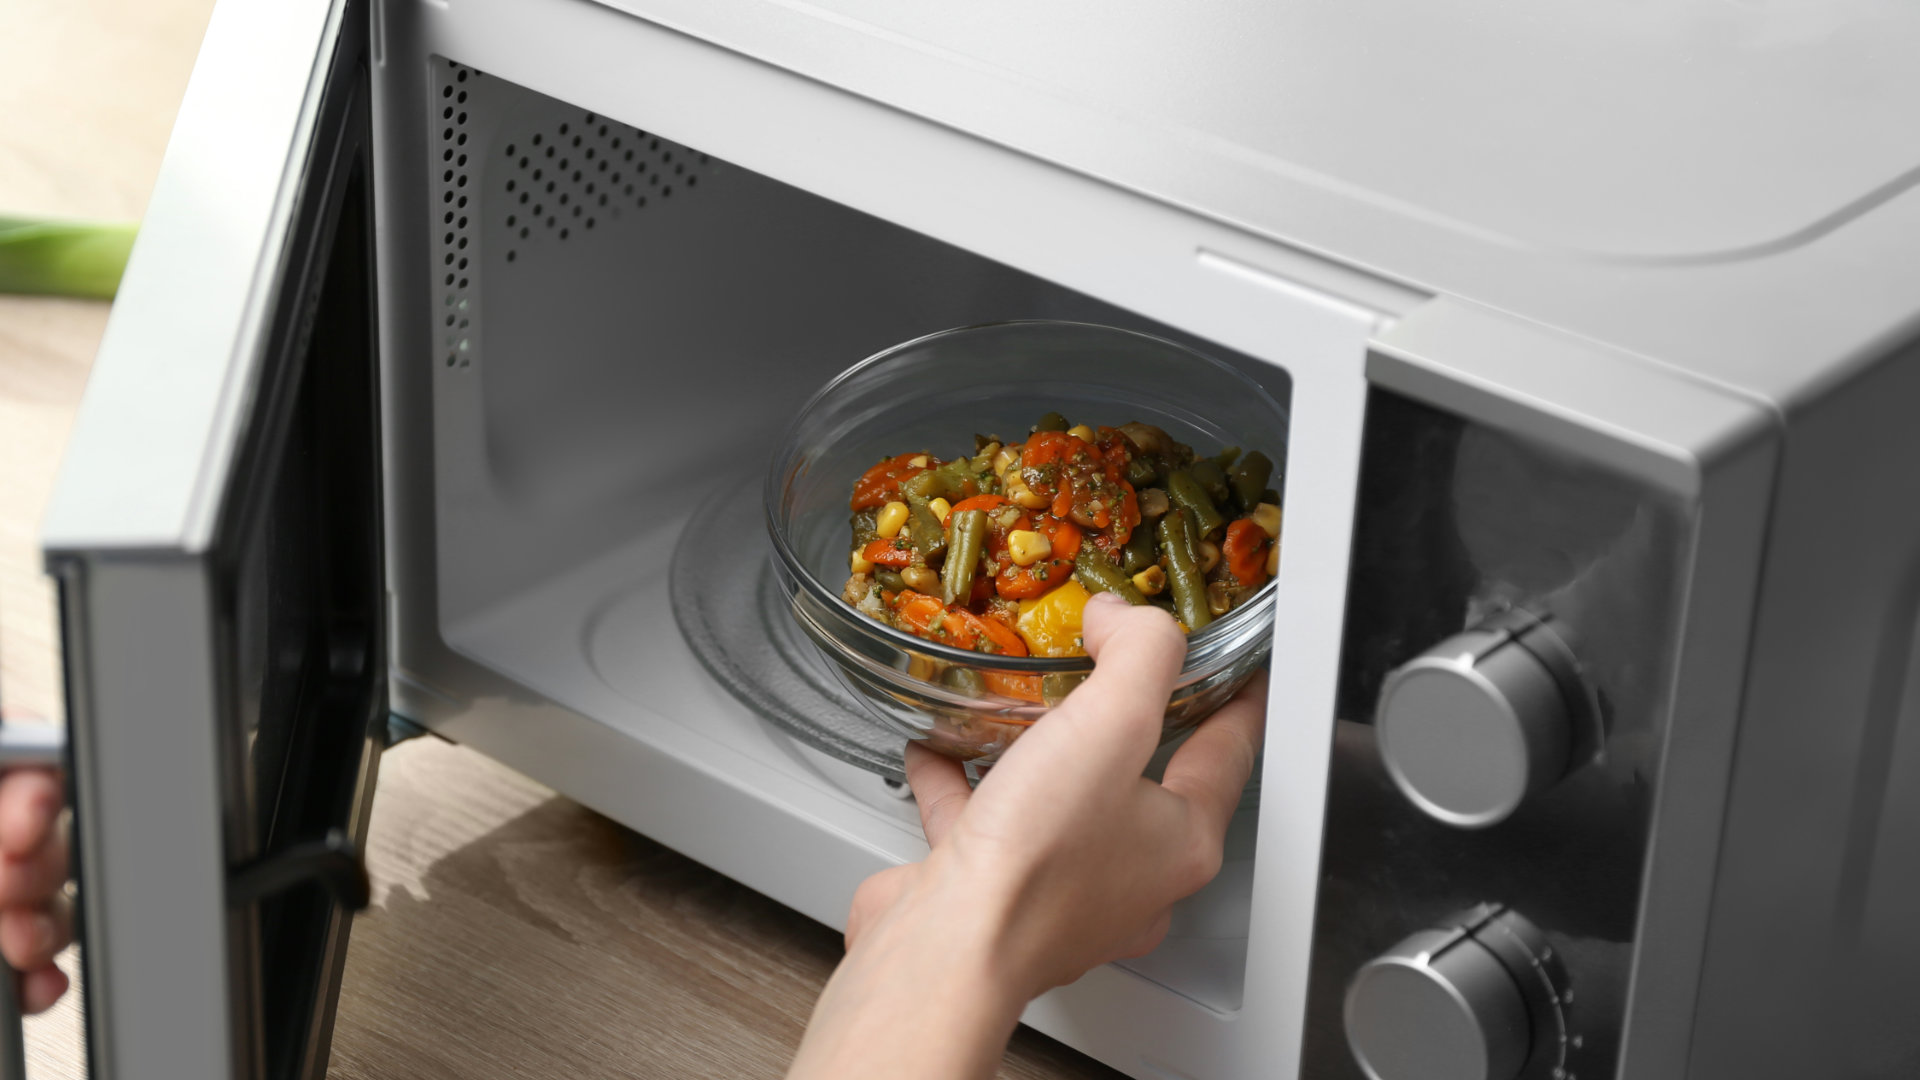 Featured image for “Microwave Running Without Heating Food? Here’s Why”